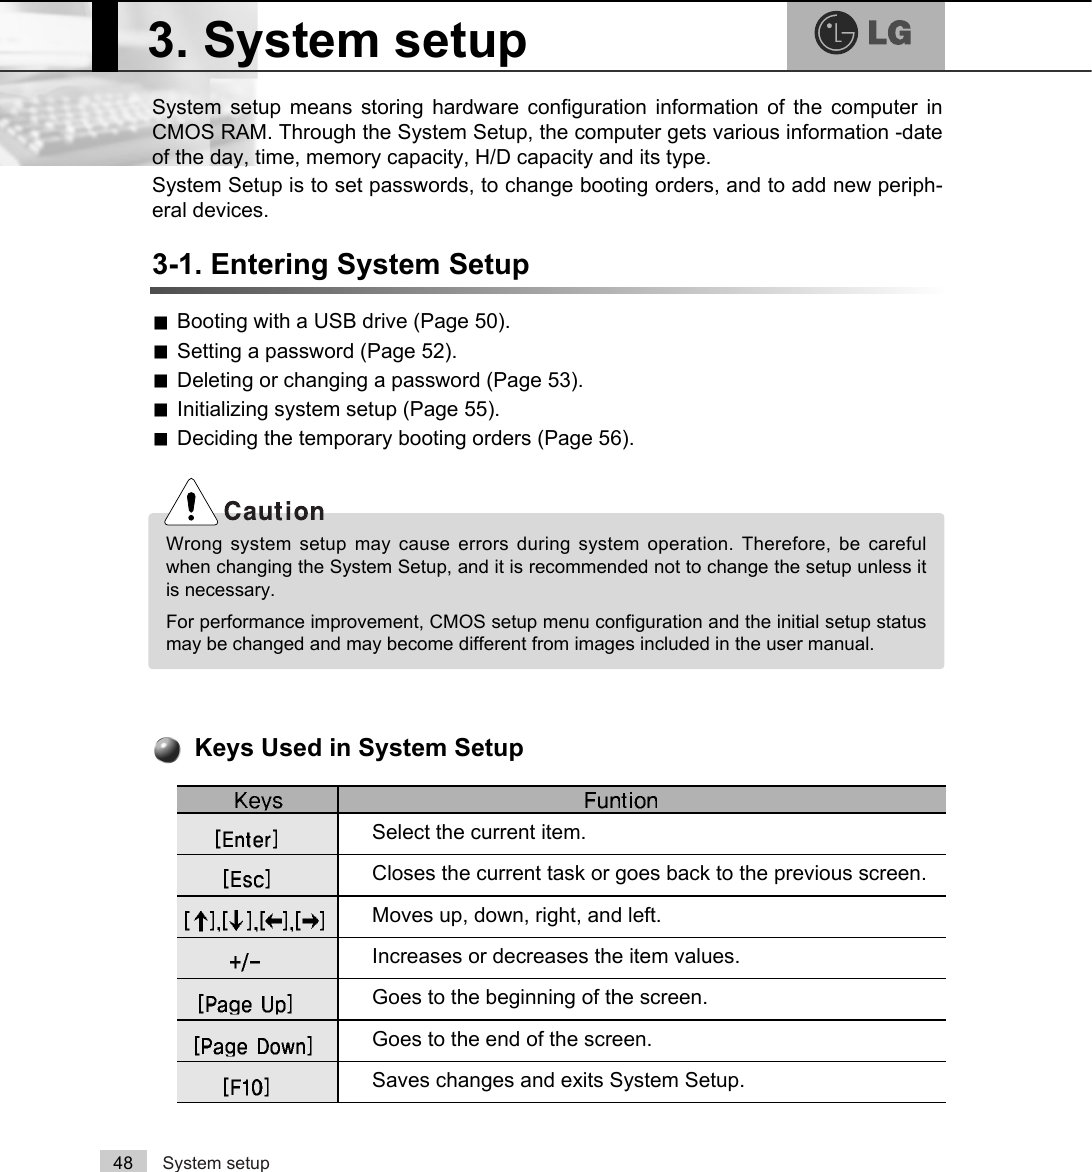 System setup48System setup means storing hardware configuration information of the computer inCMOS RAM. Through the System Setup, the computer gets various information -dateof the day, time, memory capacity, H/D capacity and its type. System Setup is to set passwords, to change booting orders, and to add new periph-eral devices.3-1. Entering System SetupBooting with a USB drive (Page 50).Setting a password (Page 52).Deleting or changing a password (Page 53).Initializing system setup (Page 55).Deciding the temporary booting orders (Page 56).Select the current item.Closes the current task or goes back to the previous screen.Moves up, down, right, and left. Increases or decreases the item values. Goes to the beginning of the screen. Goes to the end of the screen. Saves changes and exits System Setup. Keys Used in System Setup 3. System setupWrong system setup may cause errors during system operation. Therefore, be carefulwhen changing the System Setup, and it is recommended not to change the setup unless itis necessary. For performance improvement, CMOS setup menu configuration and the initial setup statusmay be changed and may become different from images included in the user manual.